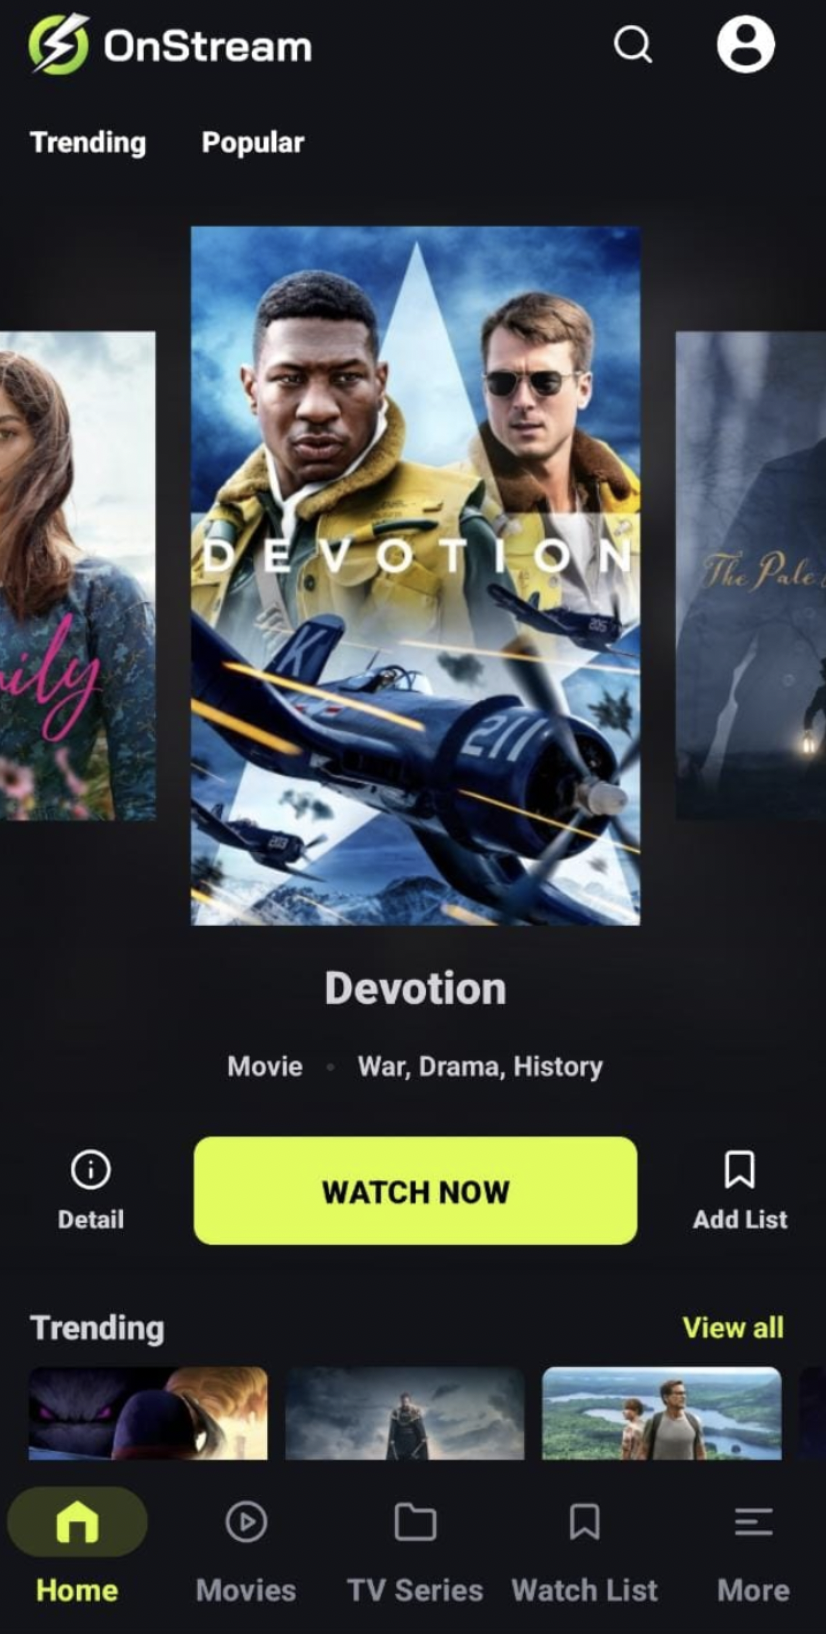 OnStream UI of Movies and TV Shows on iOS